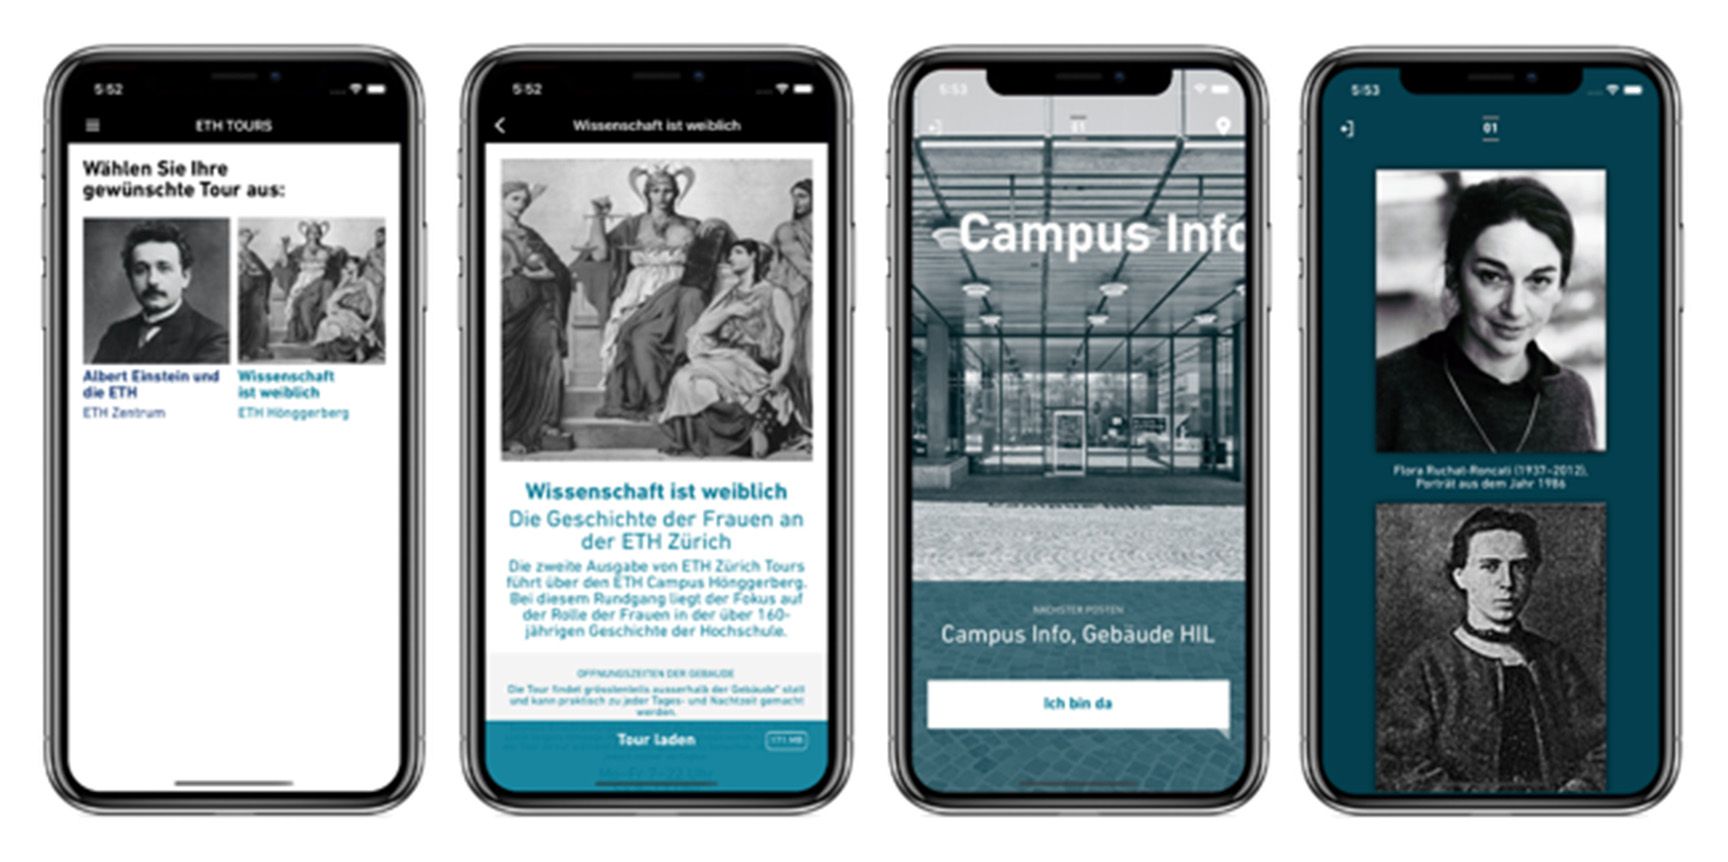 App screens of the ETH Zurich Tours app